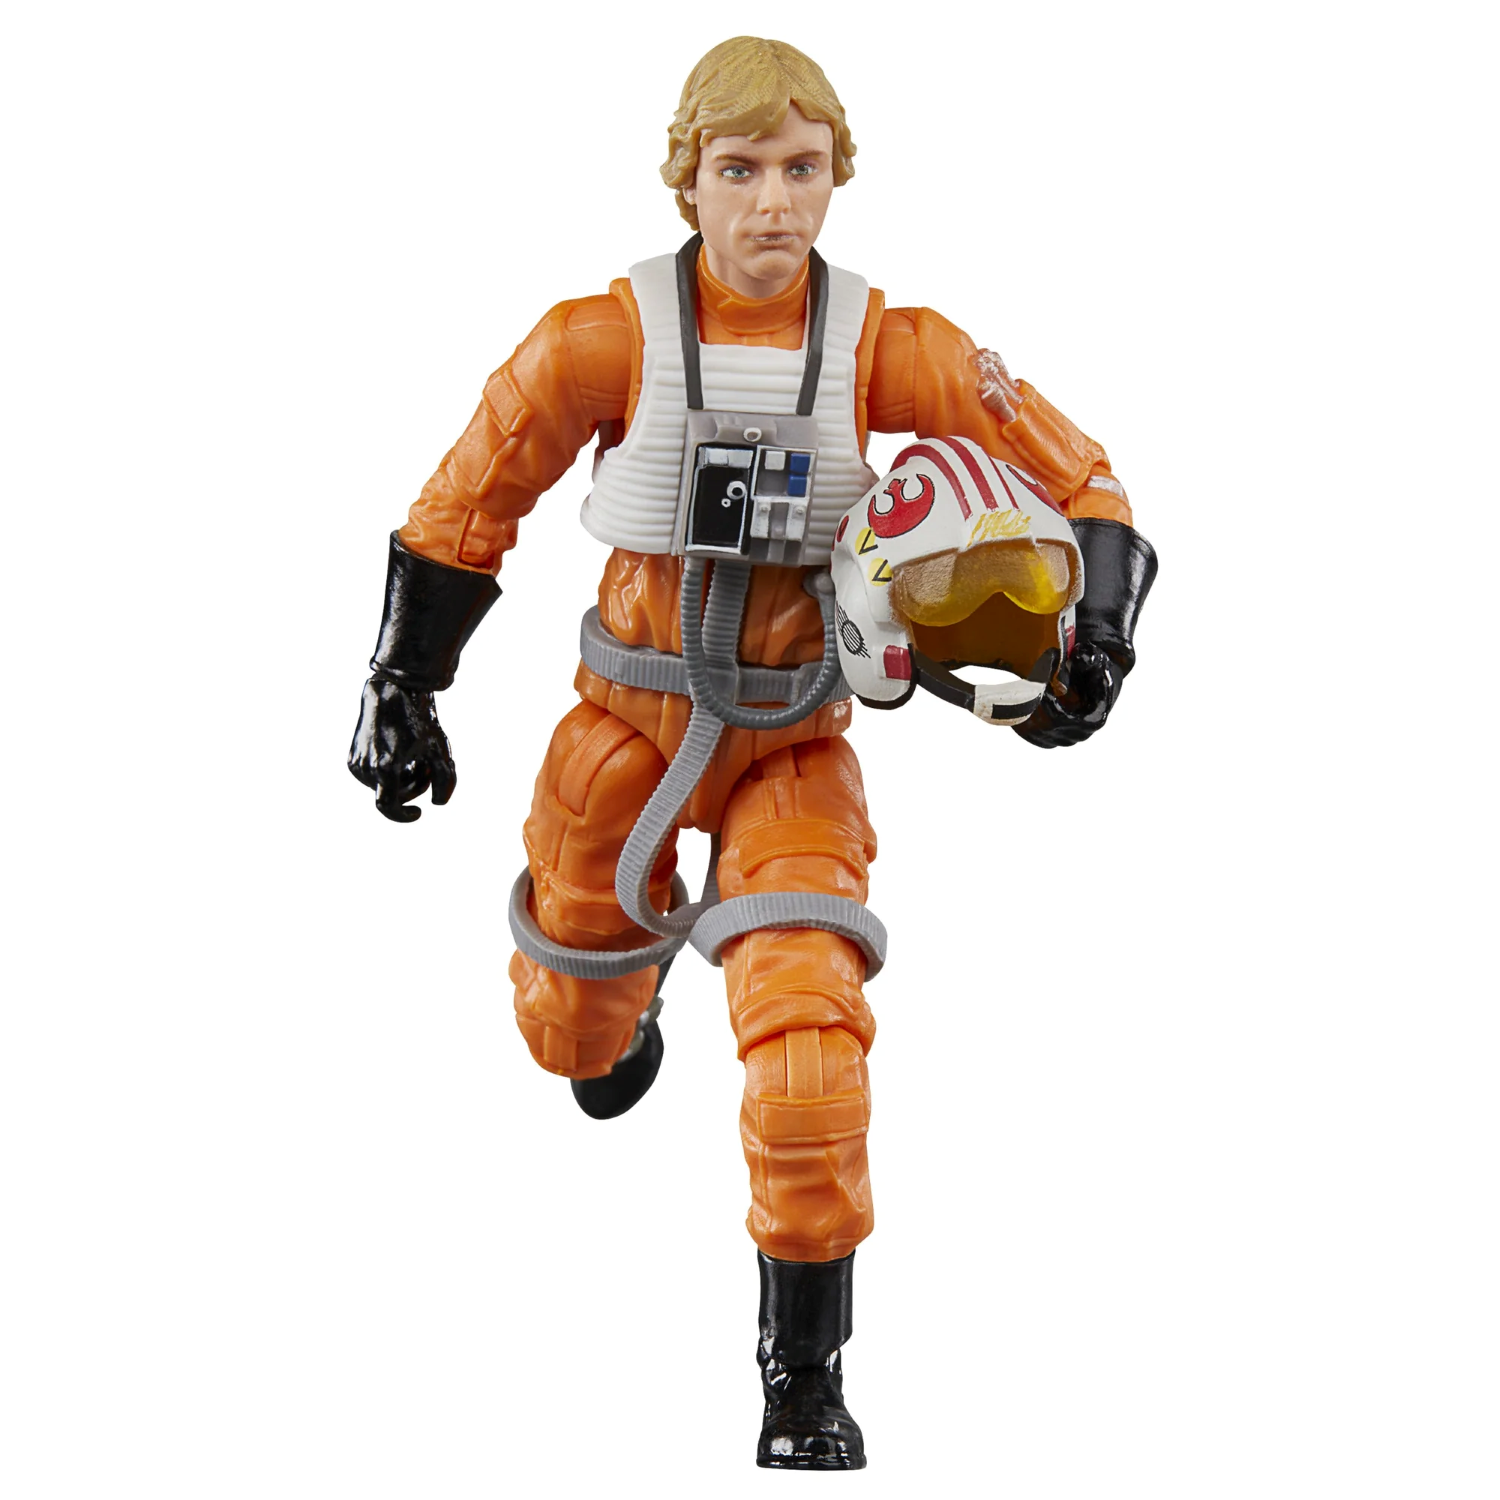 Star Wars The Vintage Collection Luke (X-Wing Pilot) 10cm F97885X0 5010996219305